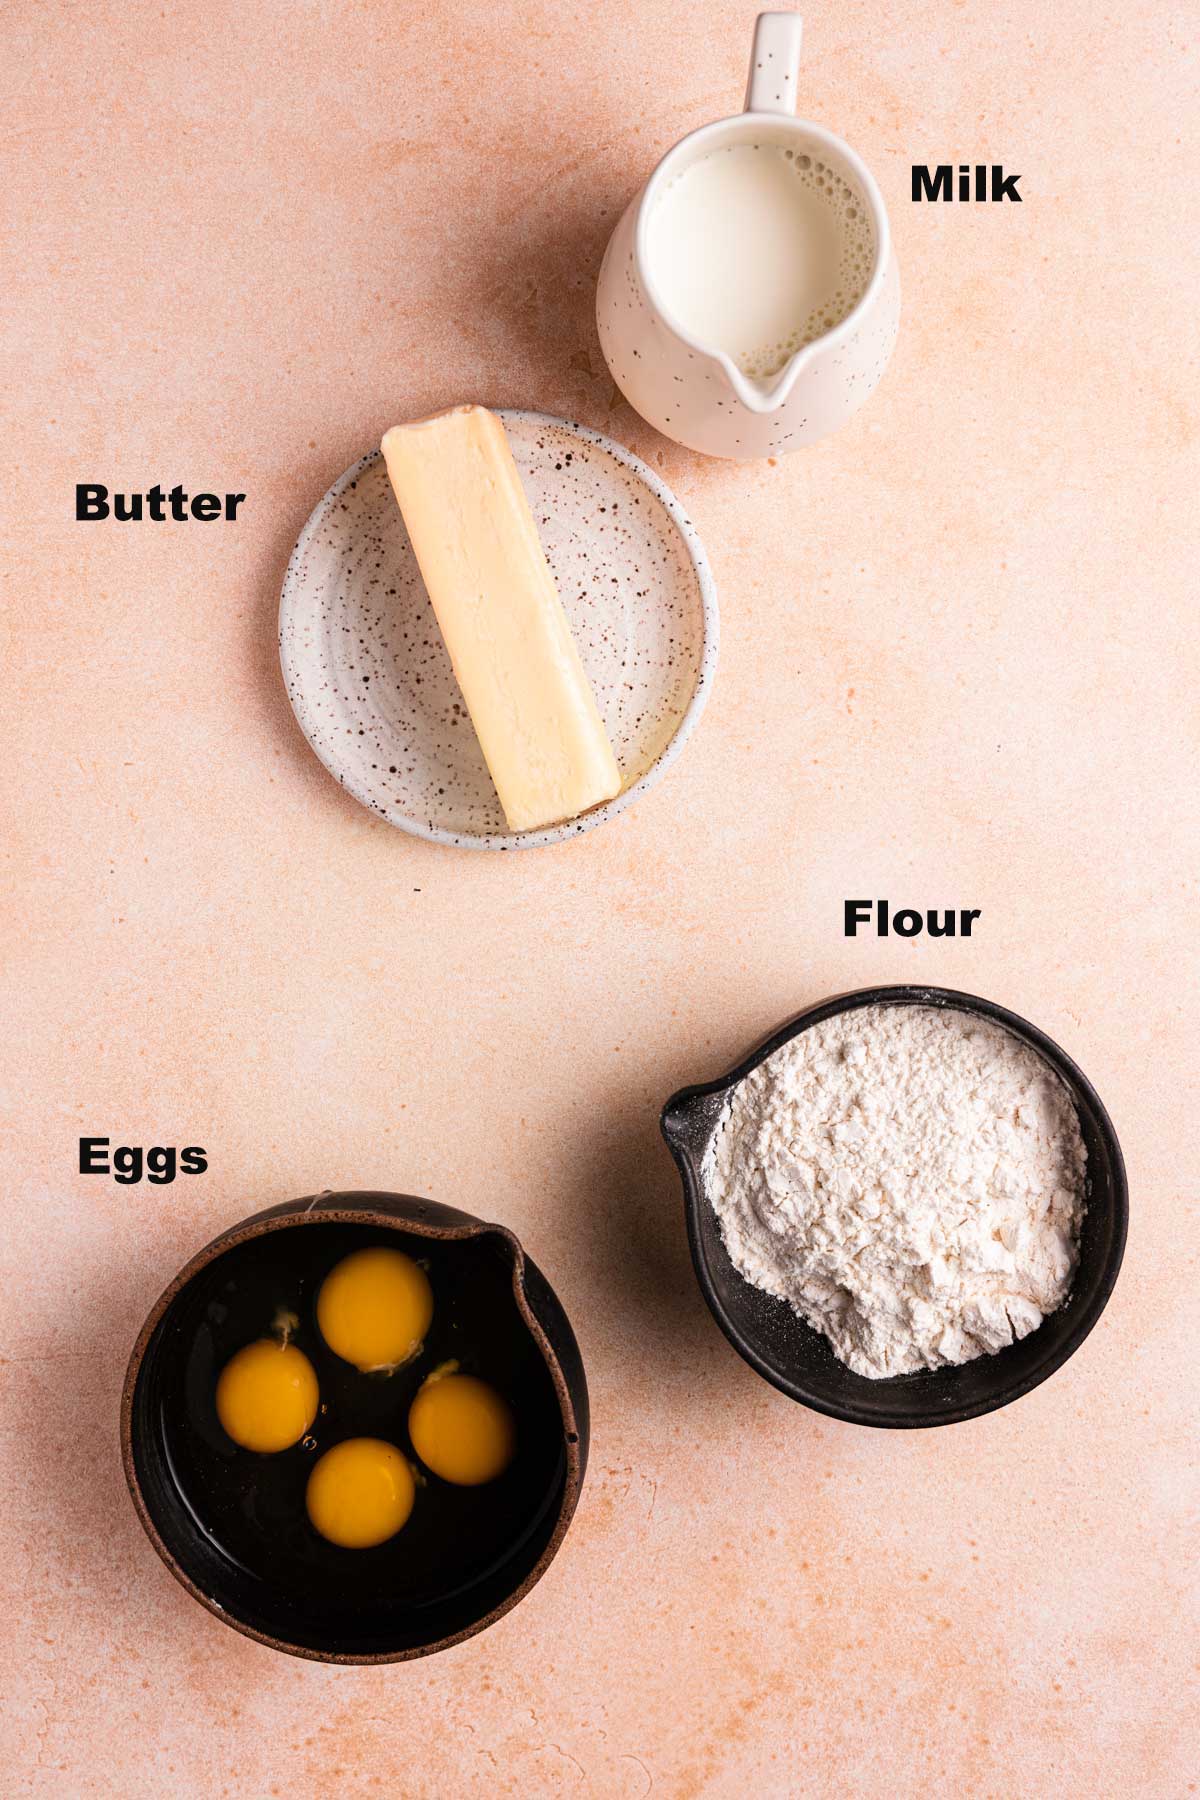 Ingredients to make choux pastry